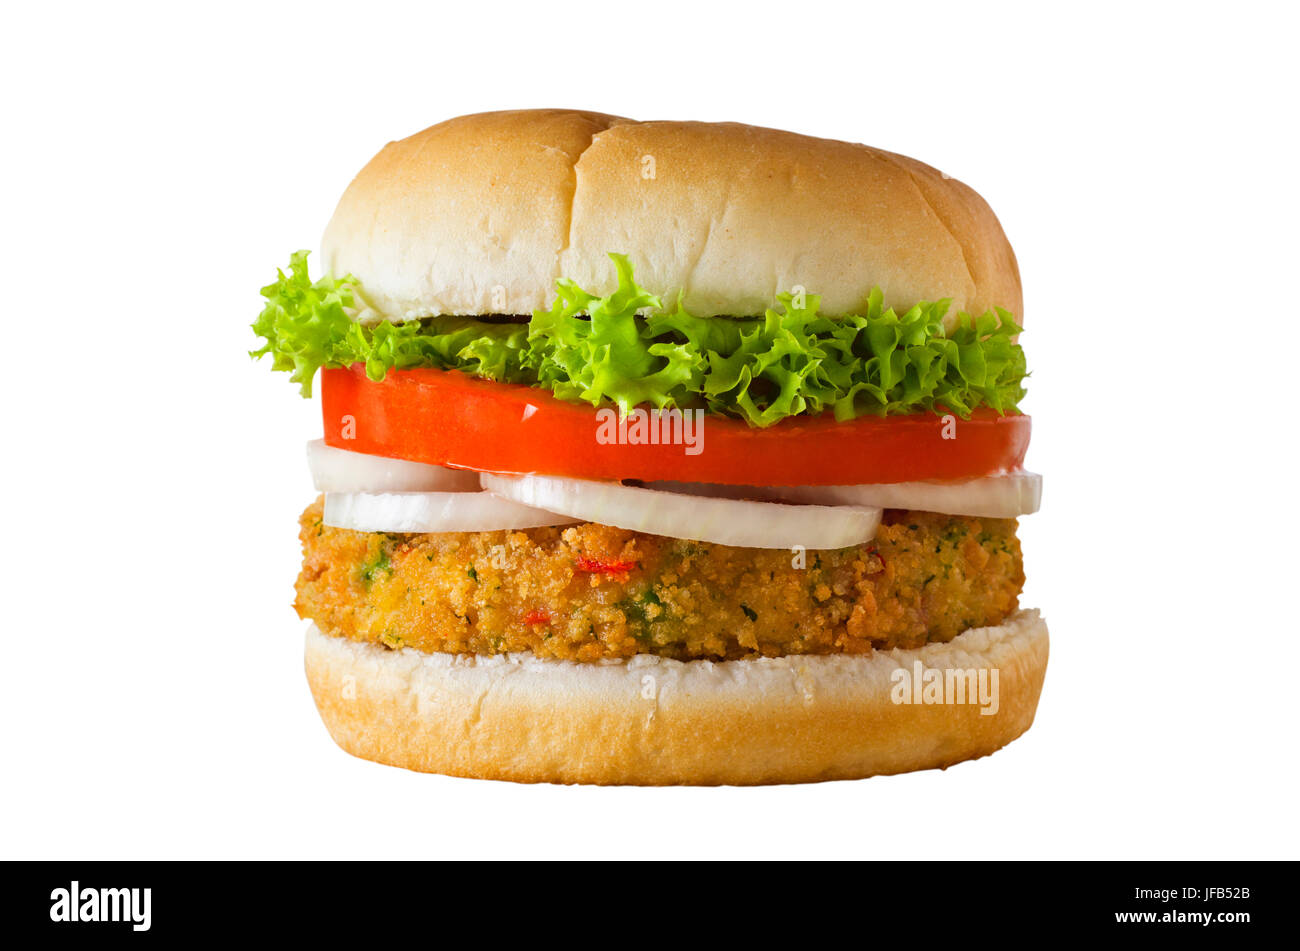 A cheese-free vegetarian burger made from vegetables and breadcrumbs, stacked with onion rings, slice of tomato and curly lettuce, in a bap.  Isolated Stock Photo